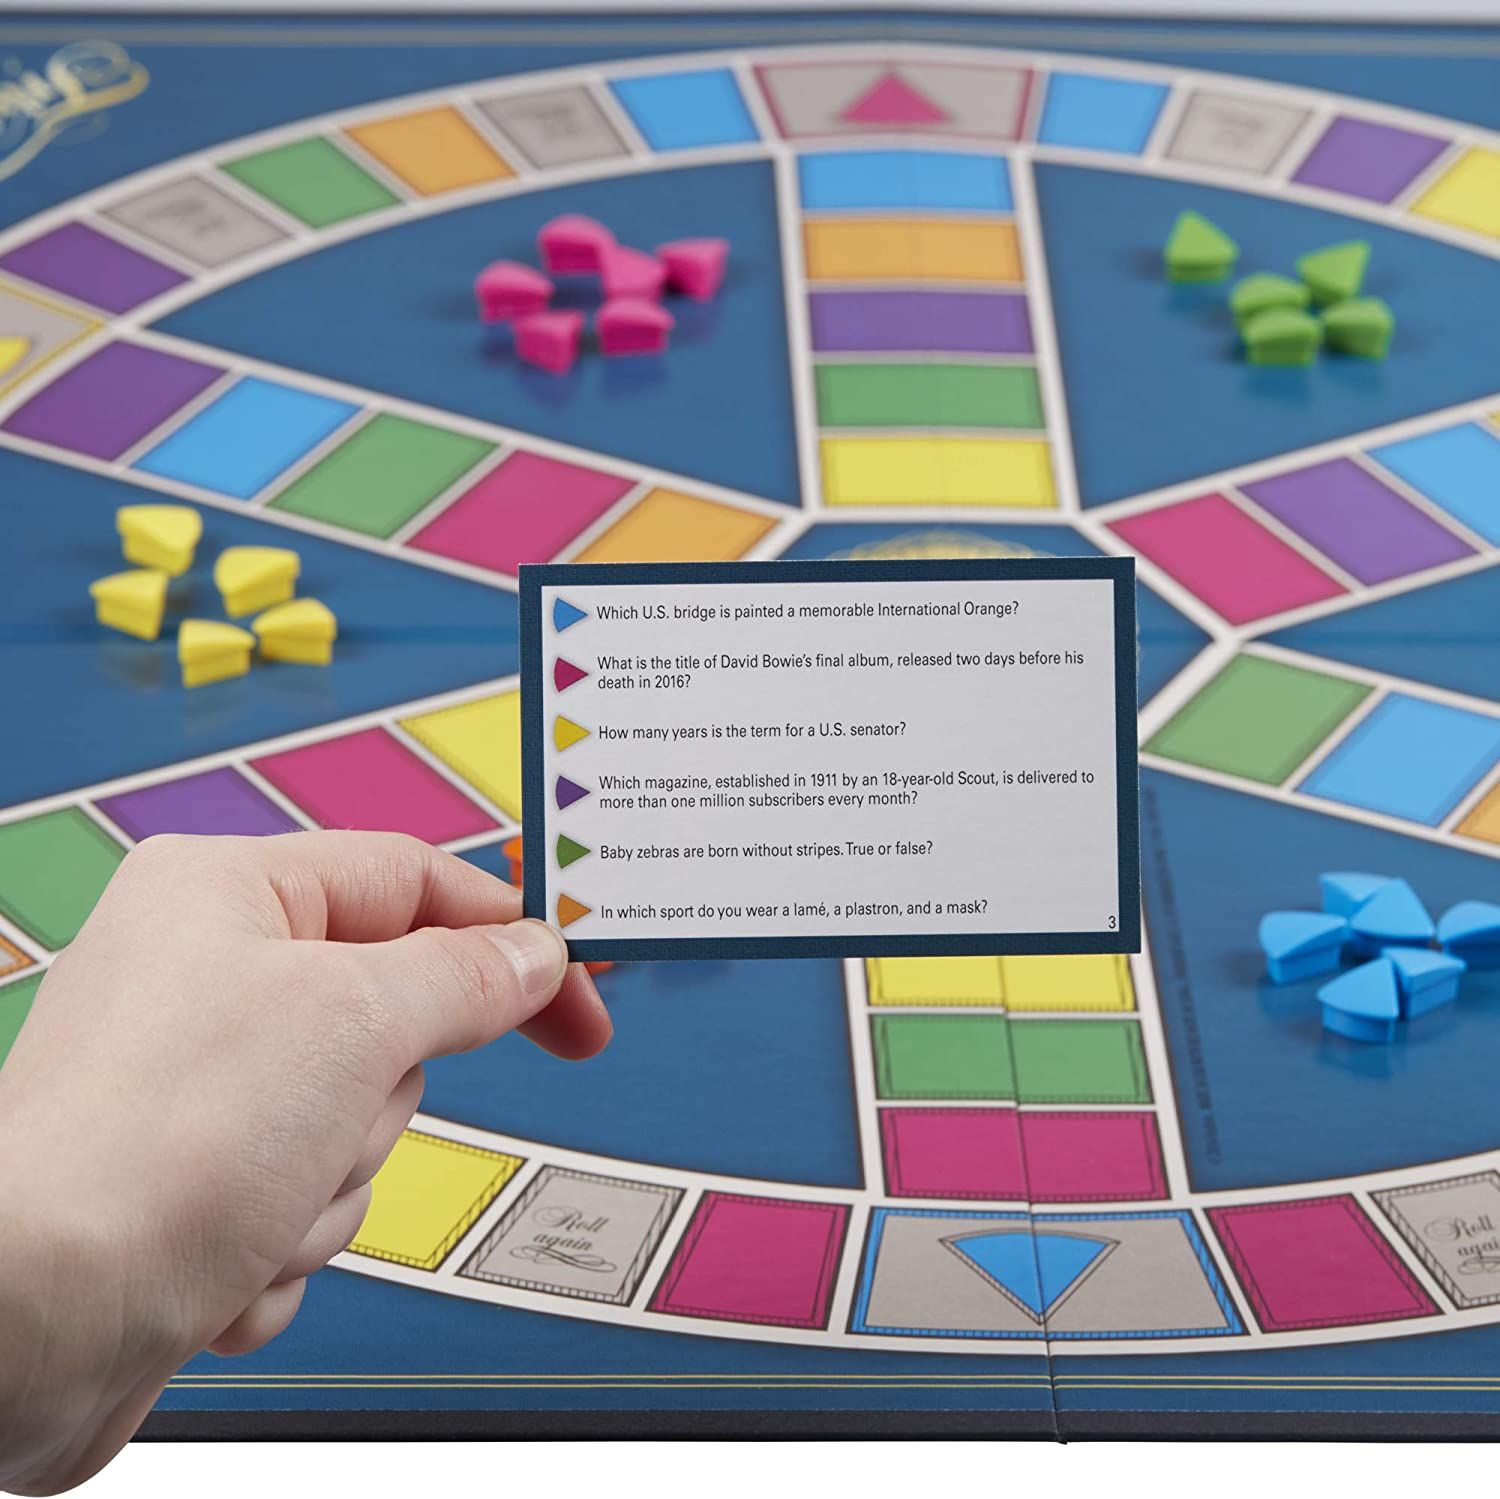 Trivial Pursuit is one of the best legacy board games